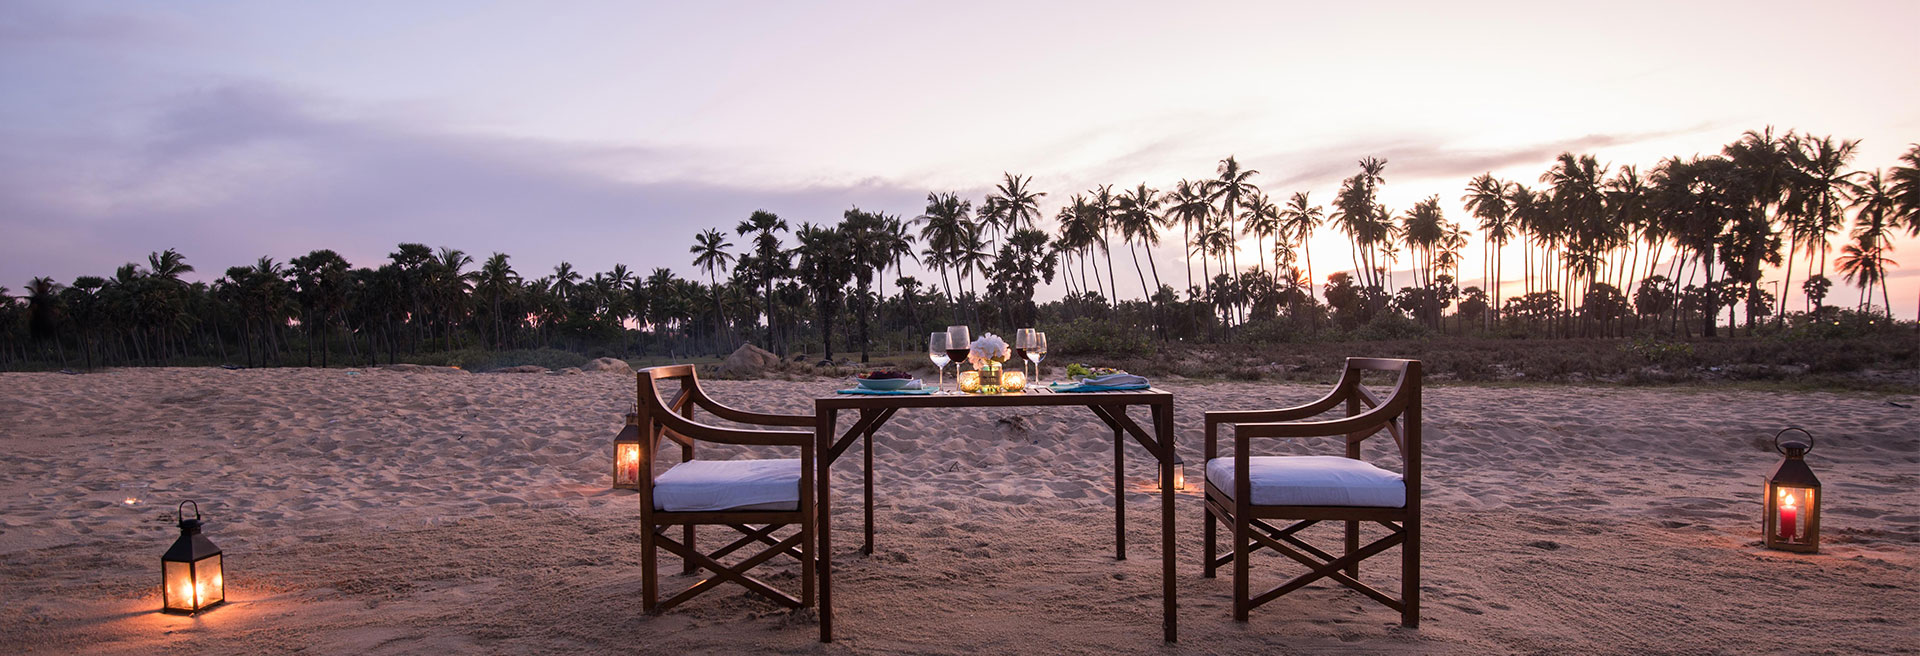 Dining experience on the beach